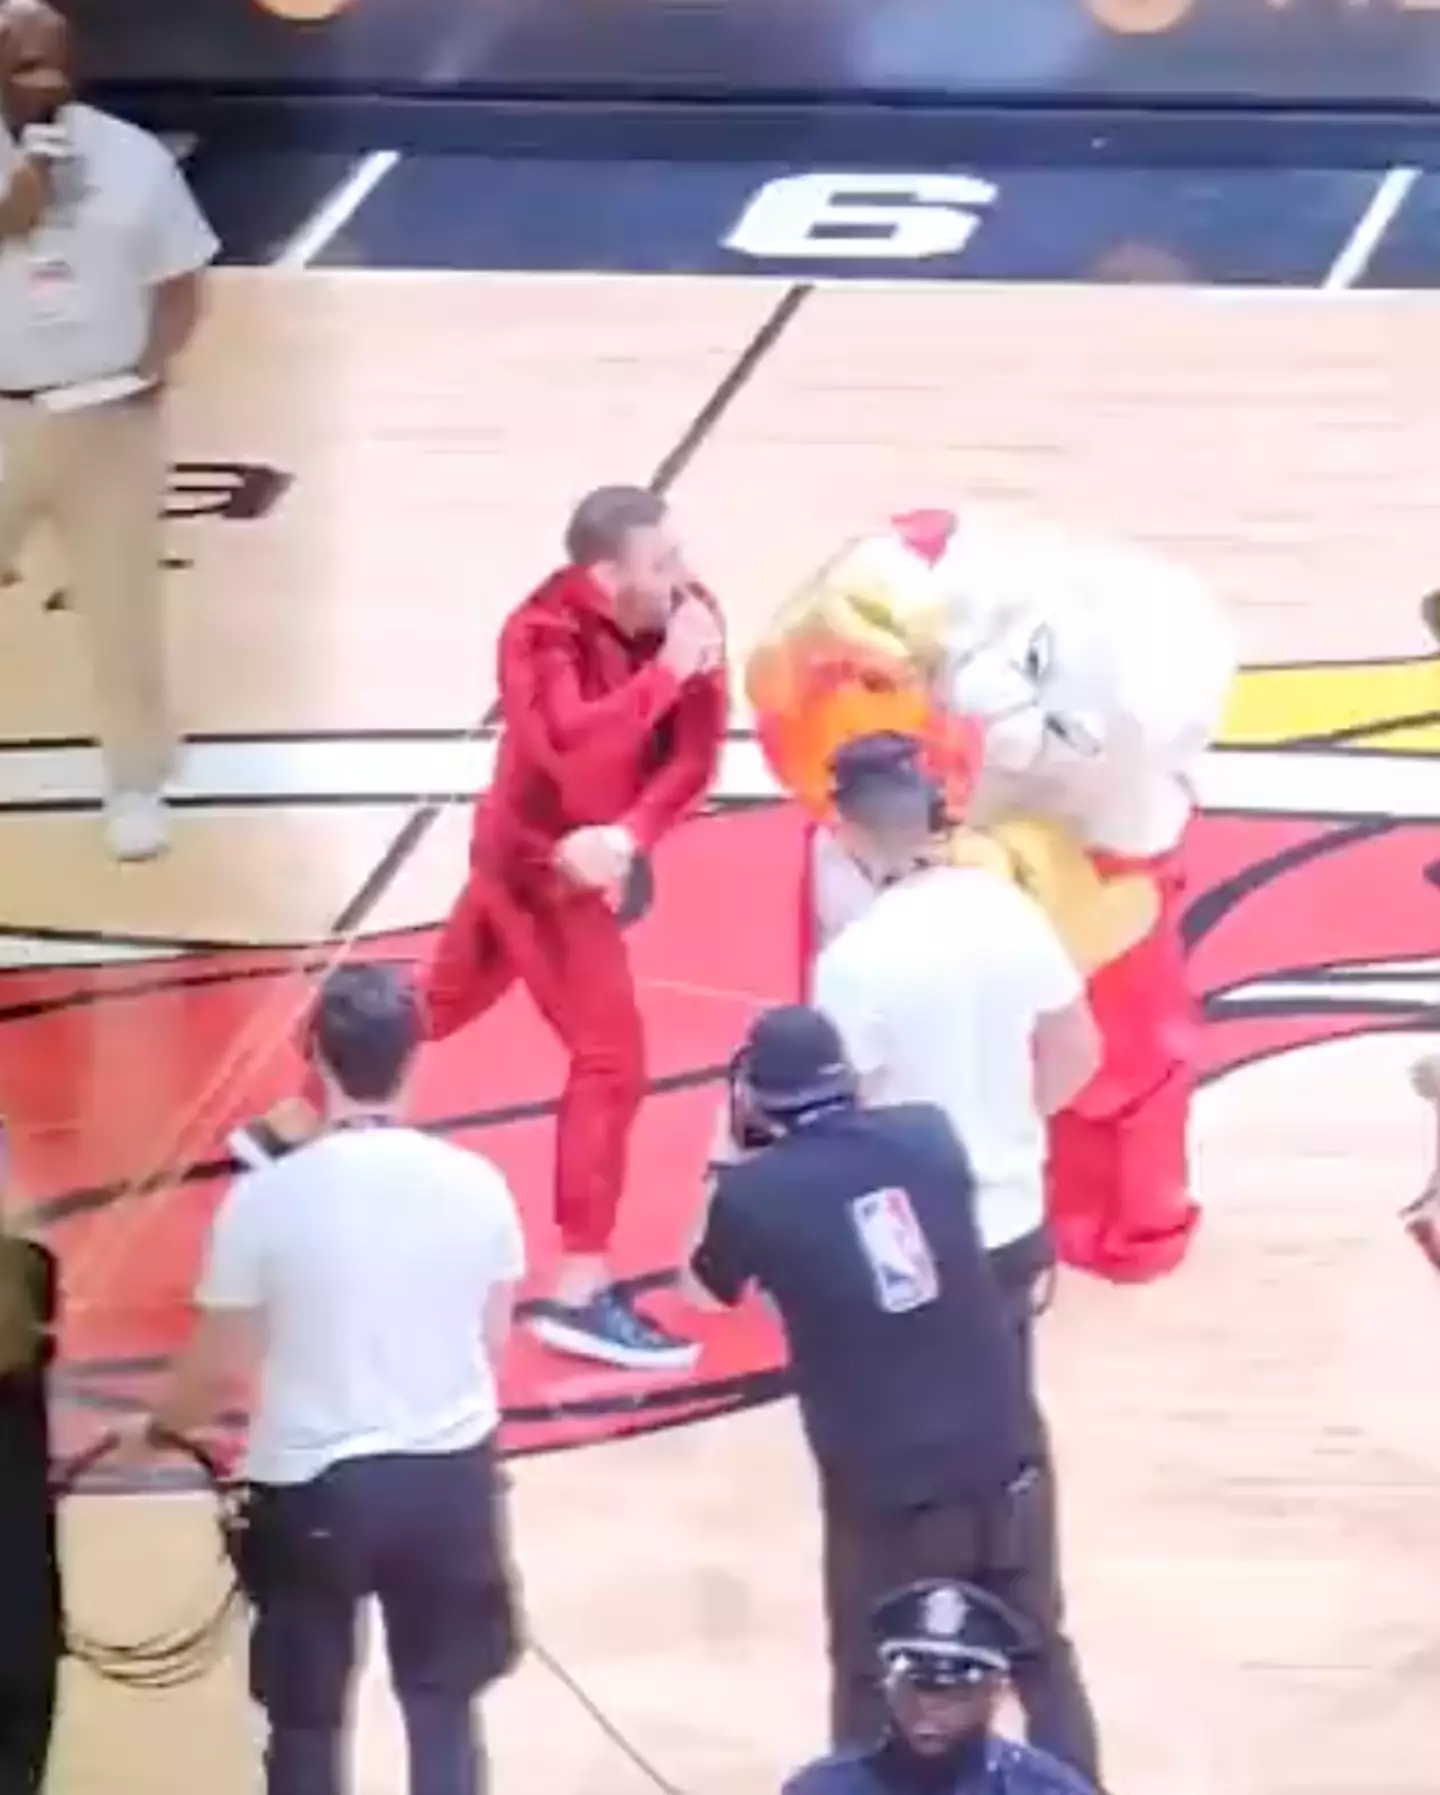 McGregor knocked the mascot off his feet.